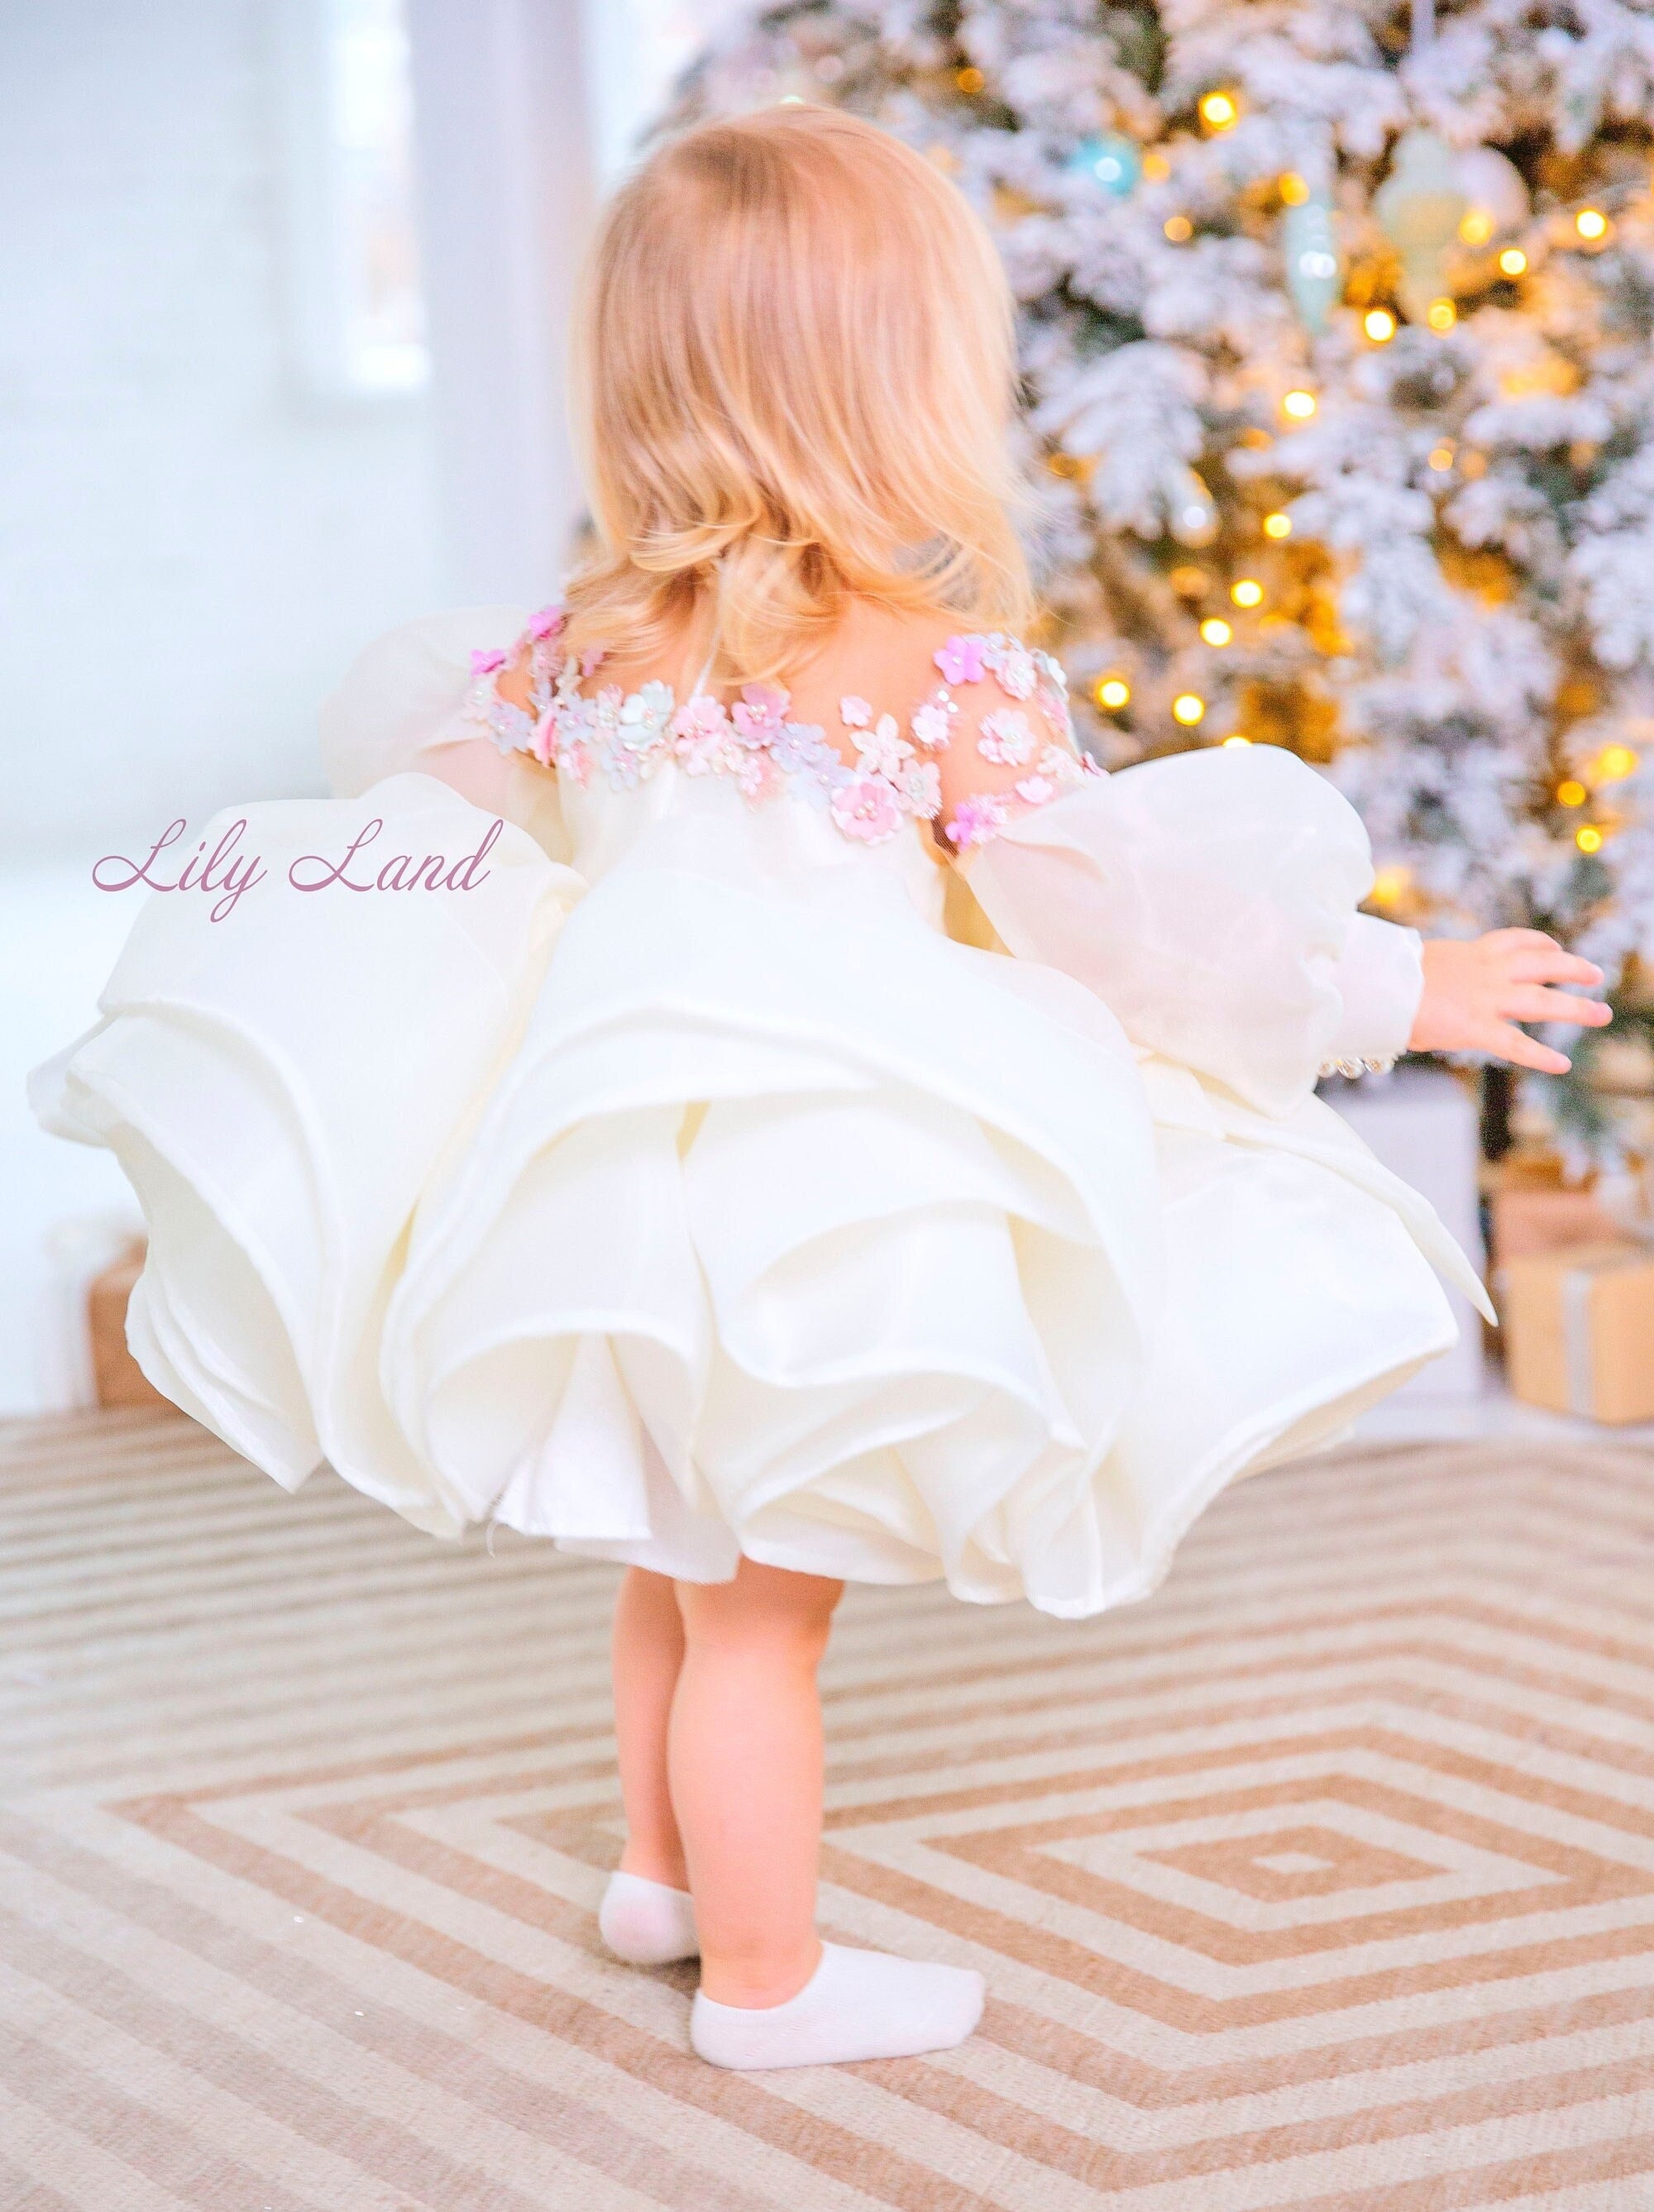 Luxury Light Pink Communion Dress With Train With Tiered Skirt, Ruffles,  And African Style For Weddings, Photo Shoots, Birthdays, Or Parties From  Faiokaver, $106.79 | DHgate.Com